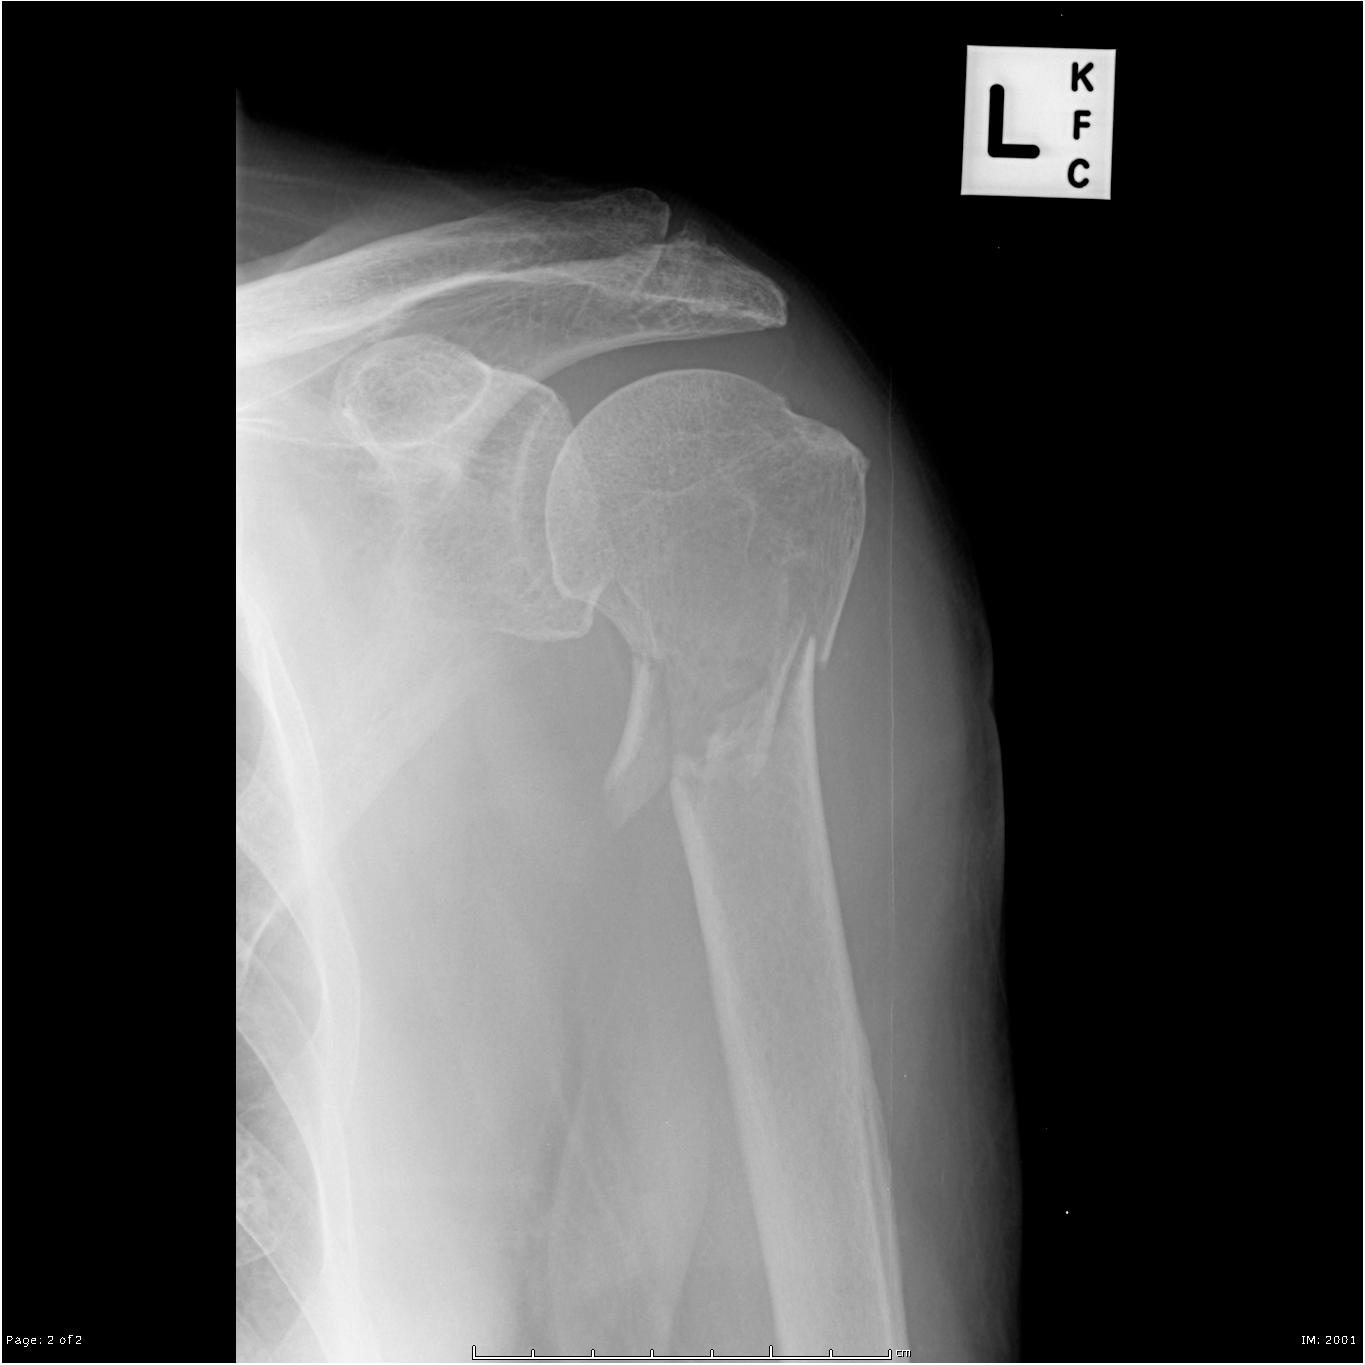 This X-ray film shows a fracture of the surgical neck of the humorous. It is this type of injury that can often affect the axillary nerve (source)